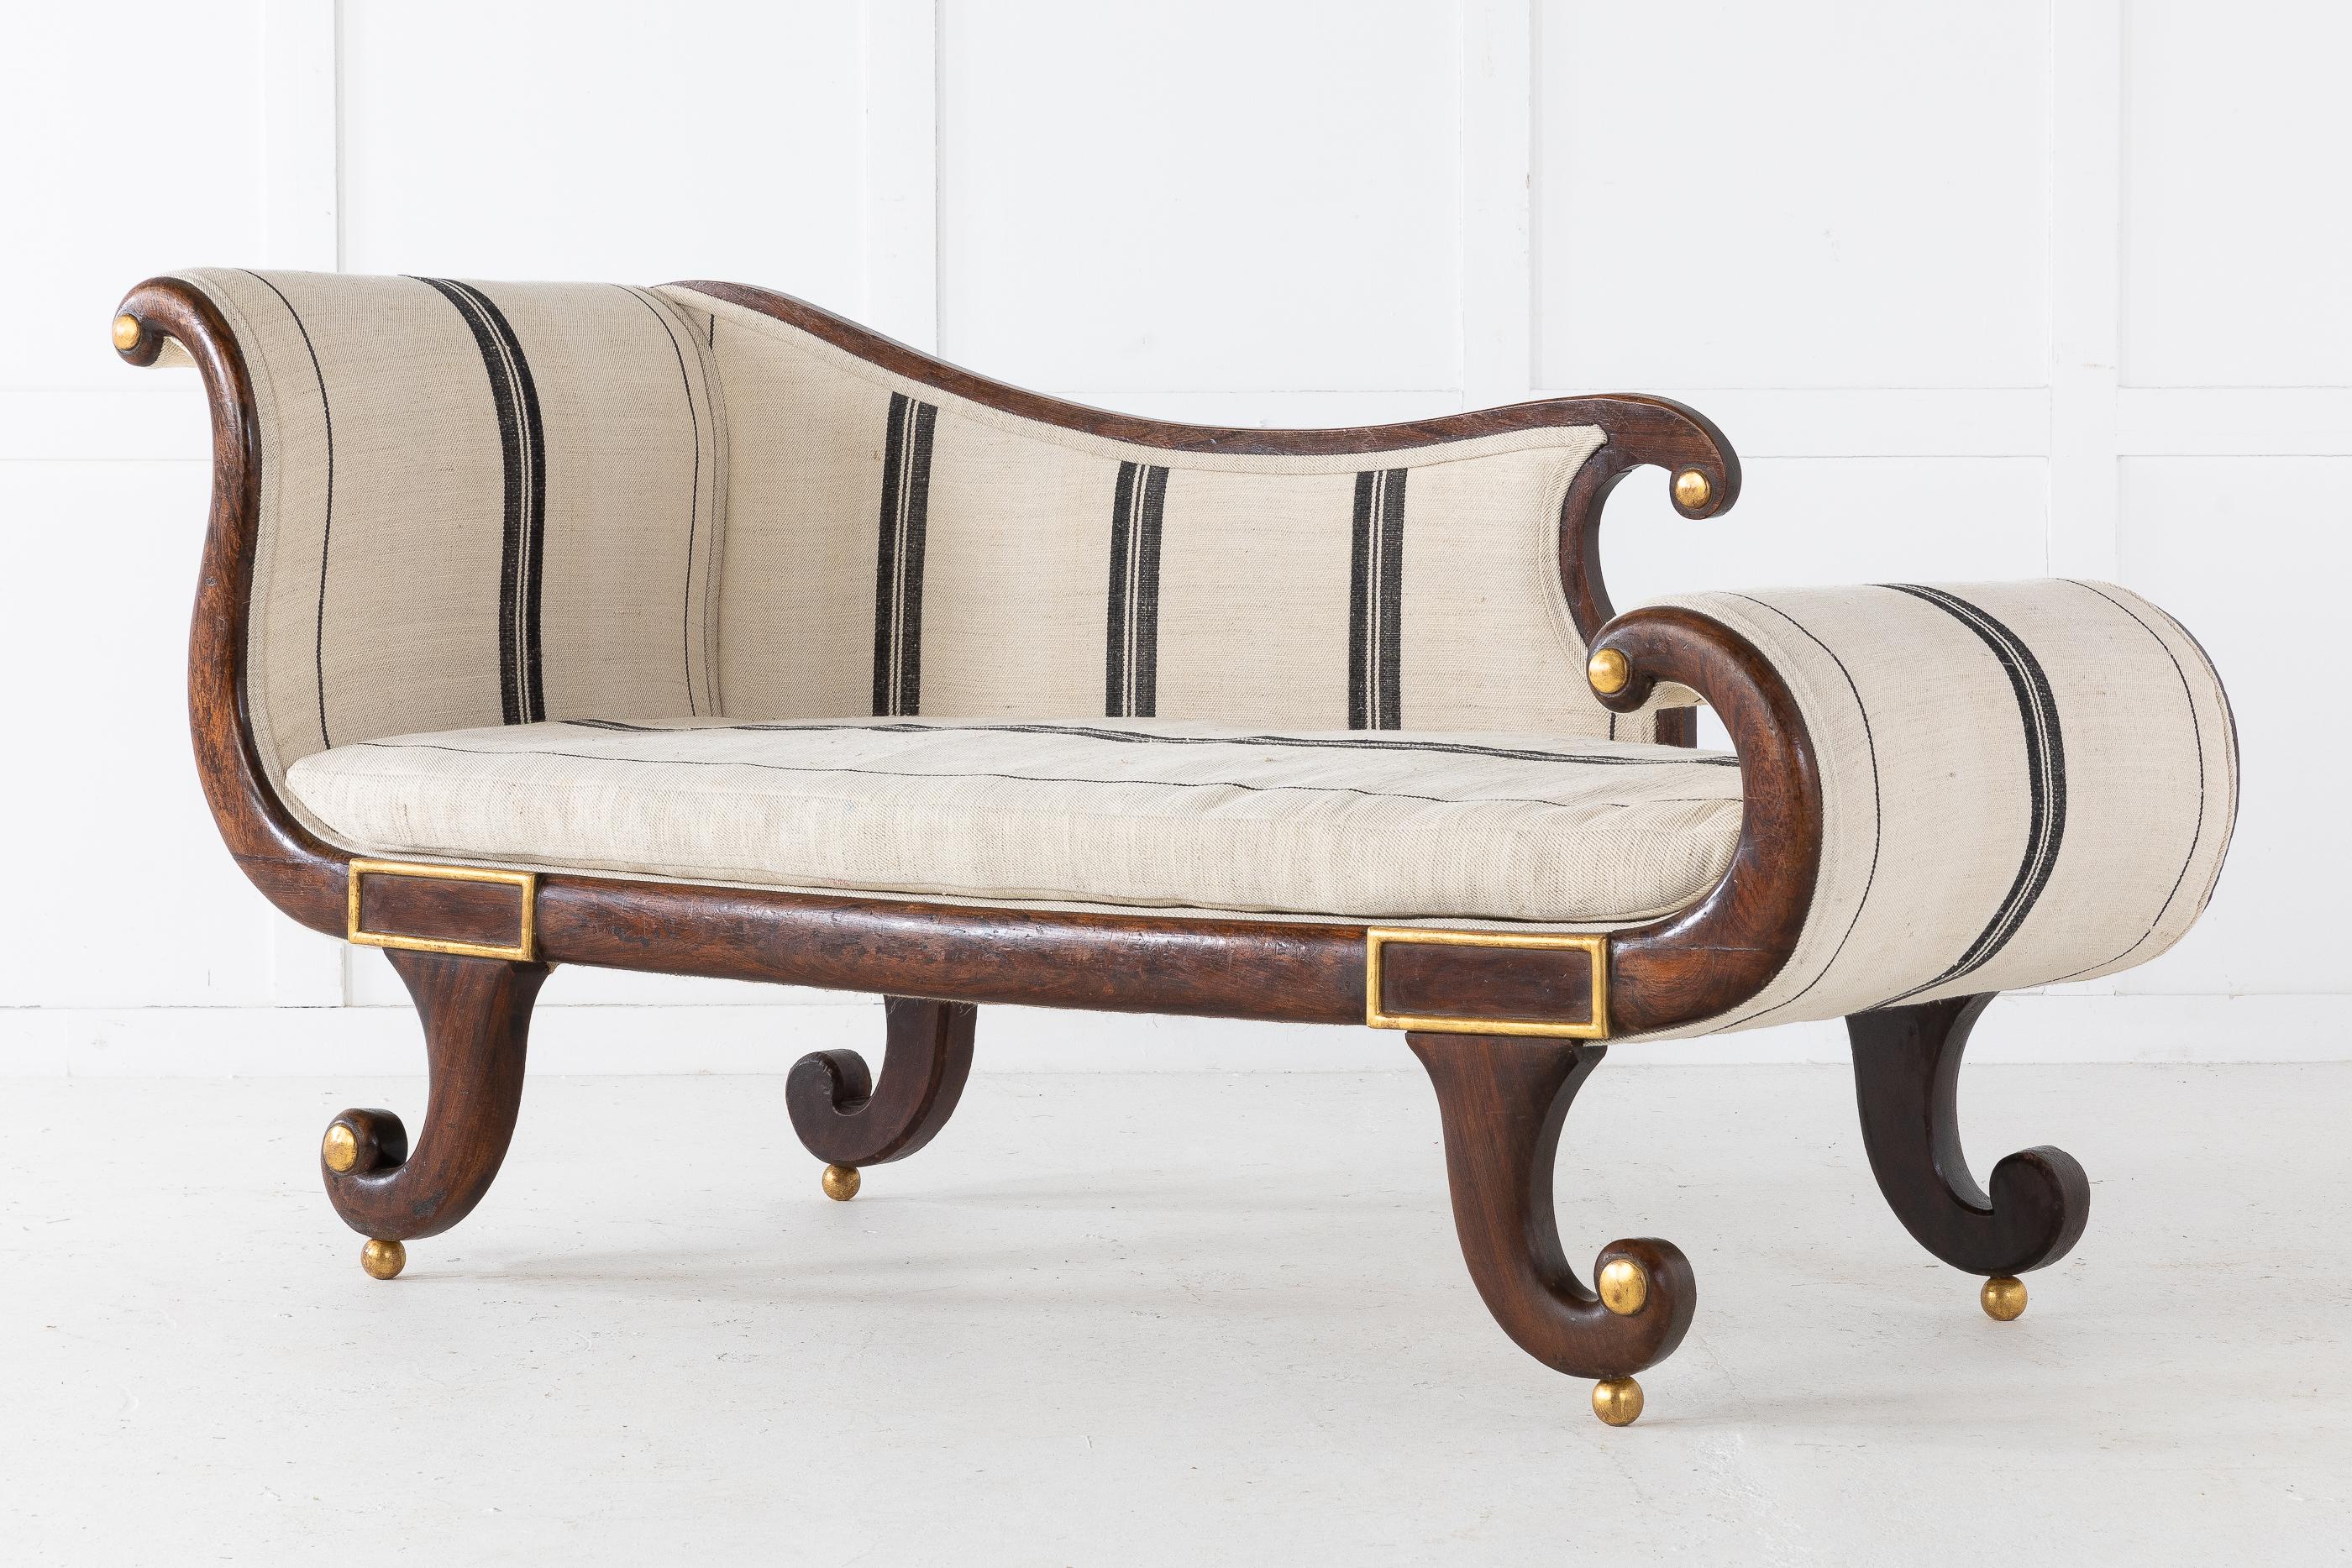 19th century English Regency simulated rosewood and gilt daybed with elegant flowing lines and nice small proportions. Fully upholstered in our workshop with antique linen.
Measures: Seat height 41
Seat depth 56.